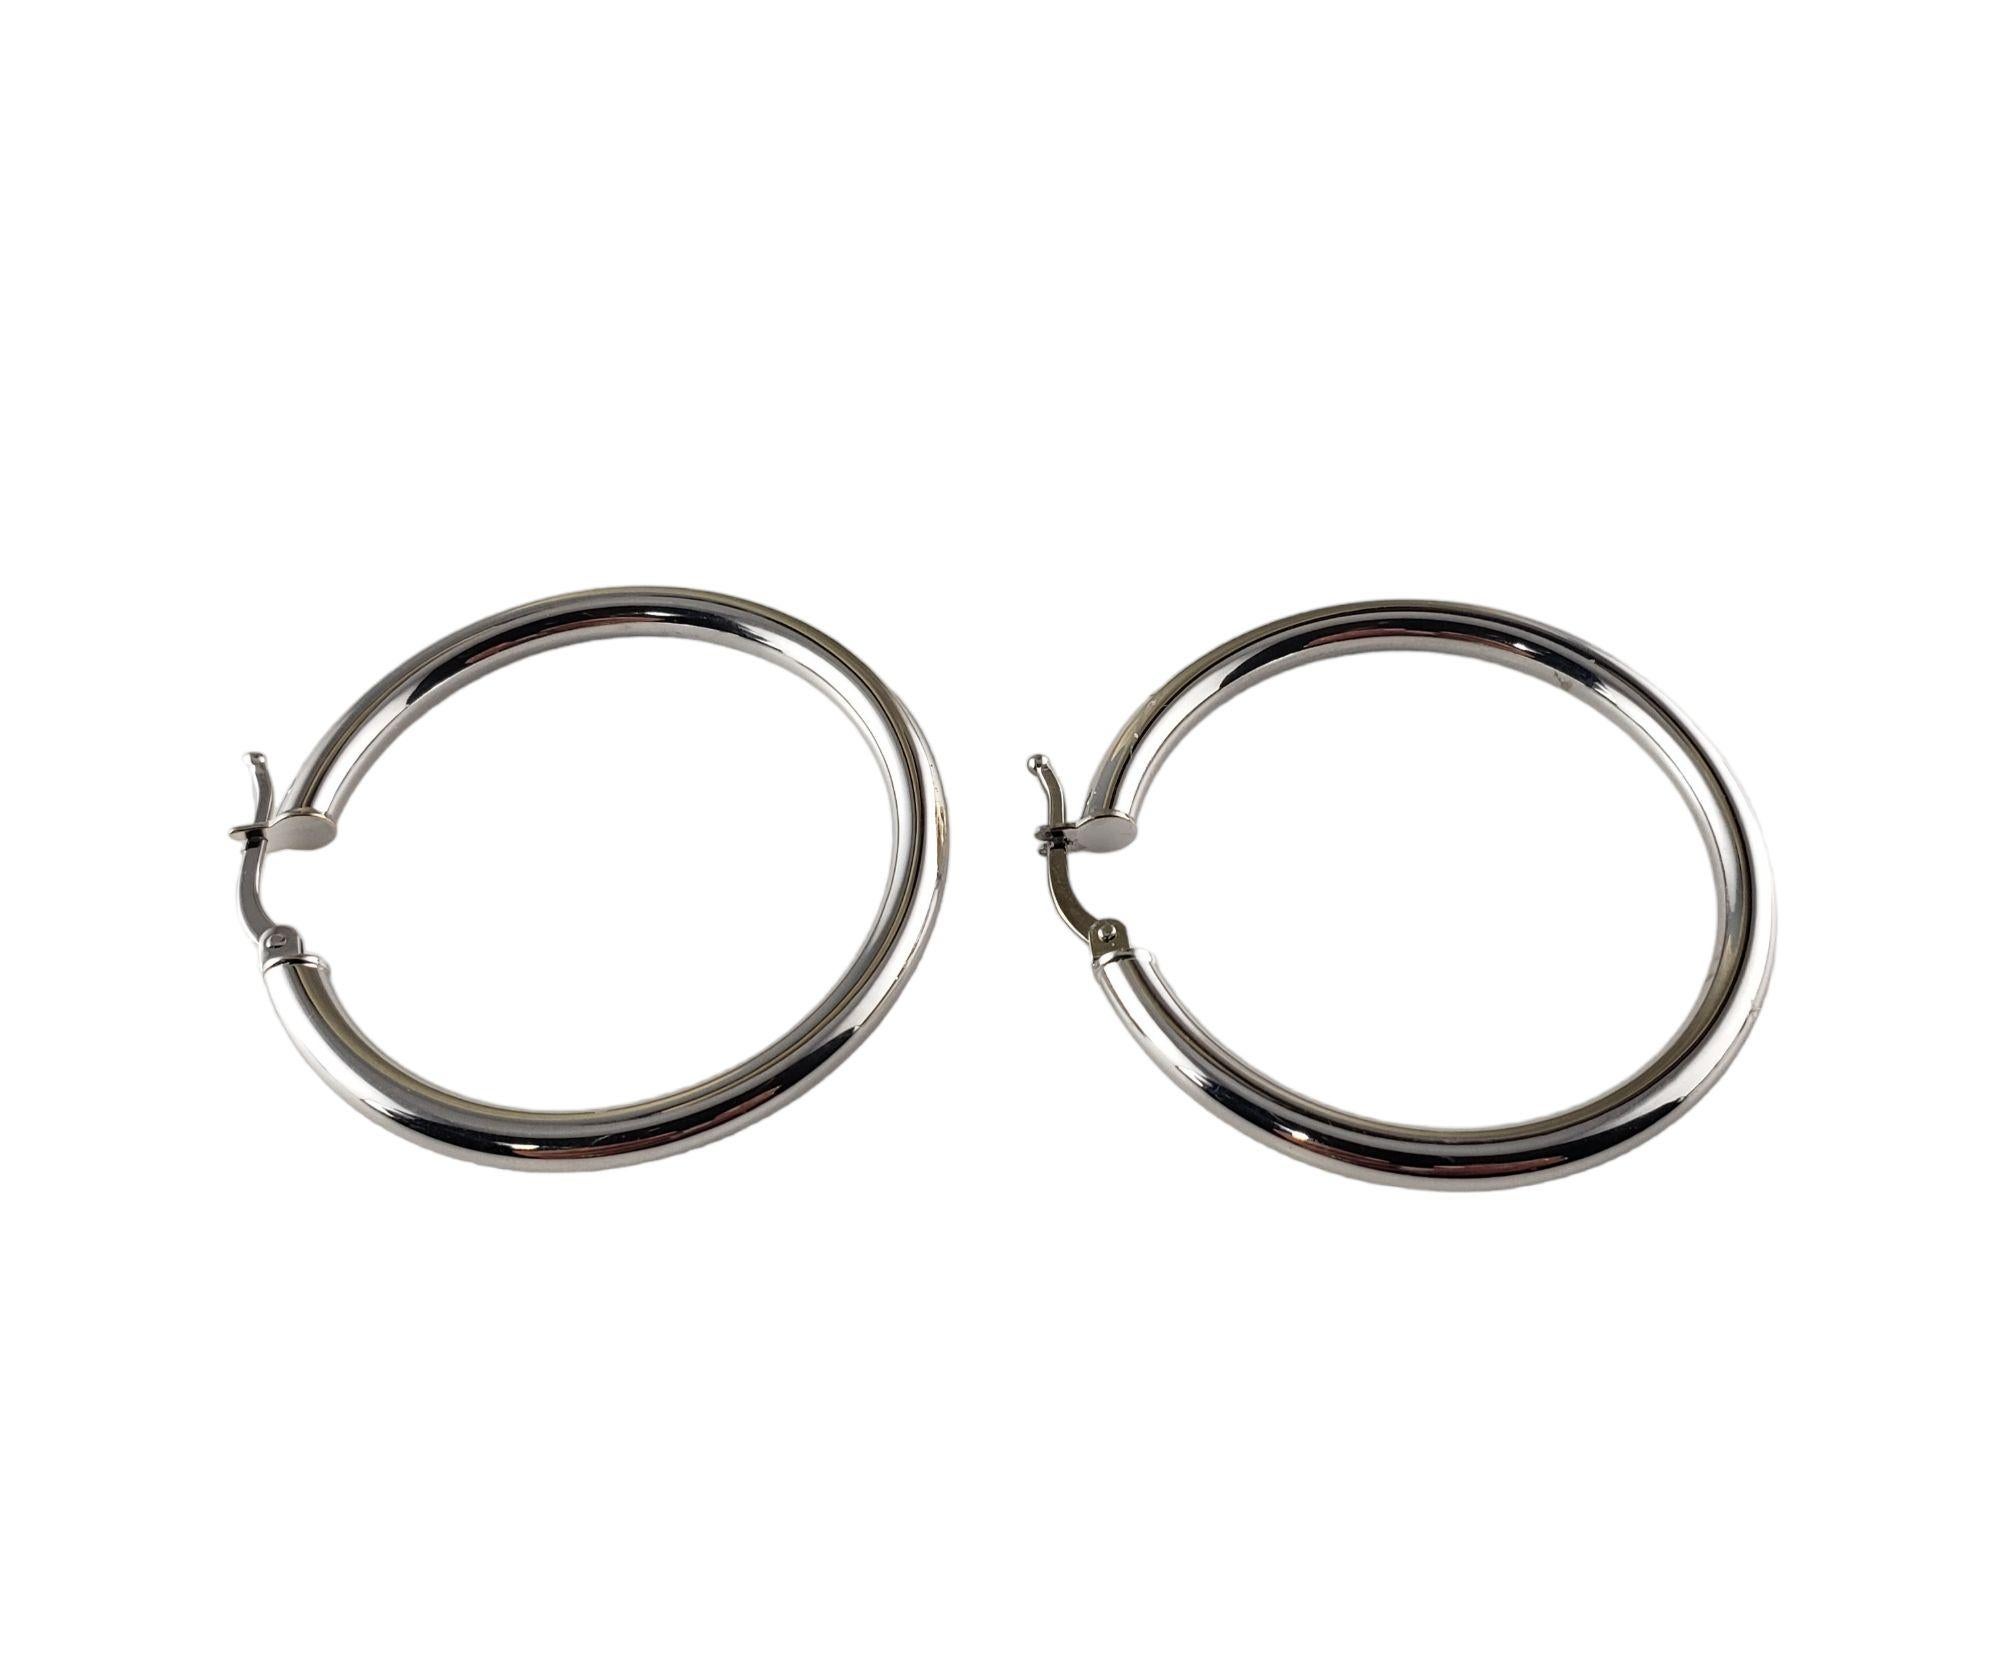 Vintage 14 Karat White Gold Hoop Earrings-

These elegant hoop earrings are crafted in beautifully detailed 14K white gold.

Size: 28 mm x 4 mm

Weight: 1.6 dwt. / 2.5 gr.

Stamped: 14K. Italy Milros

Very good condition, professionally